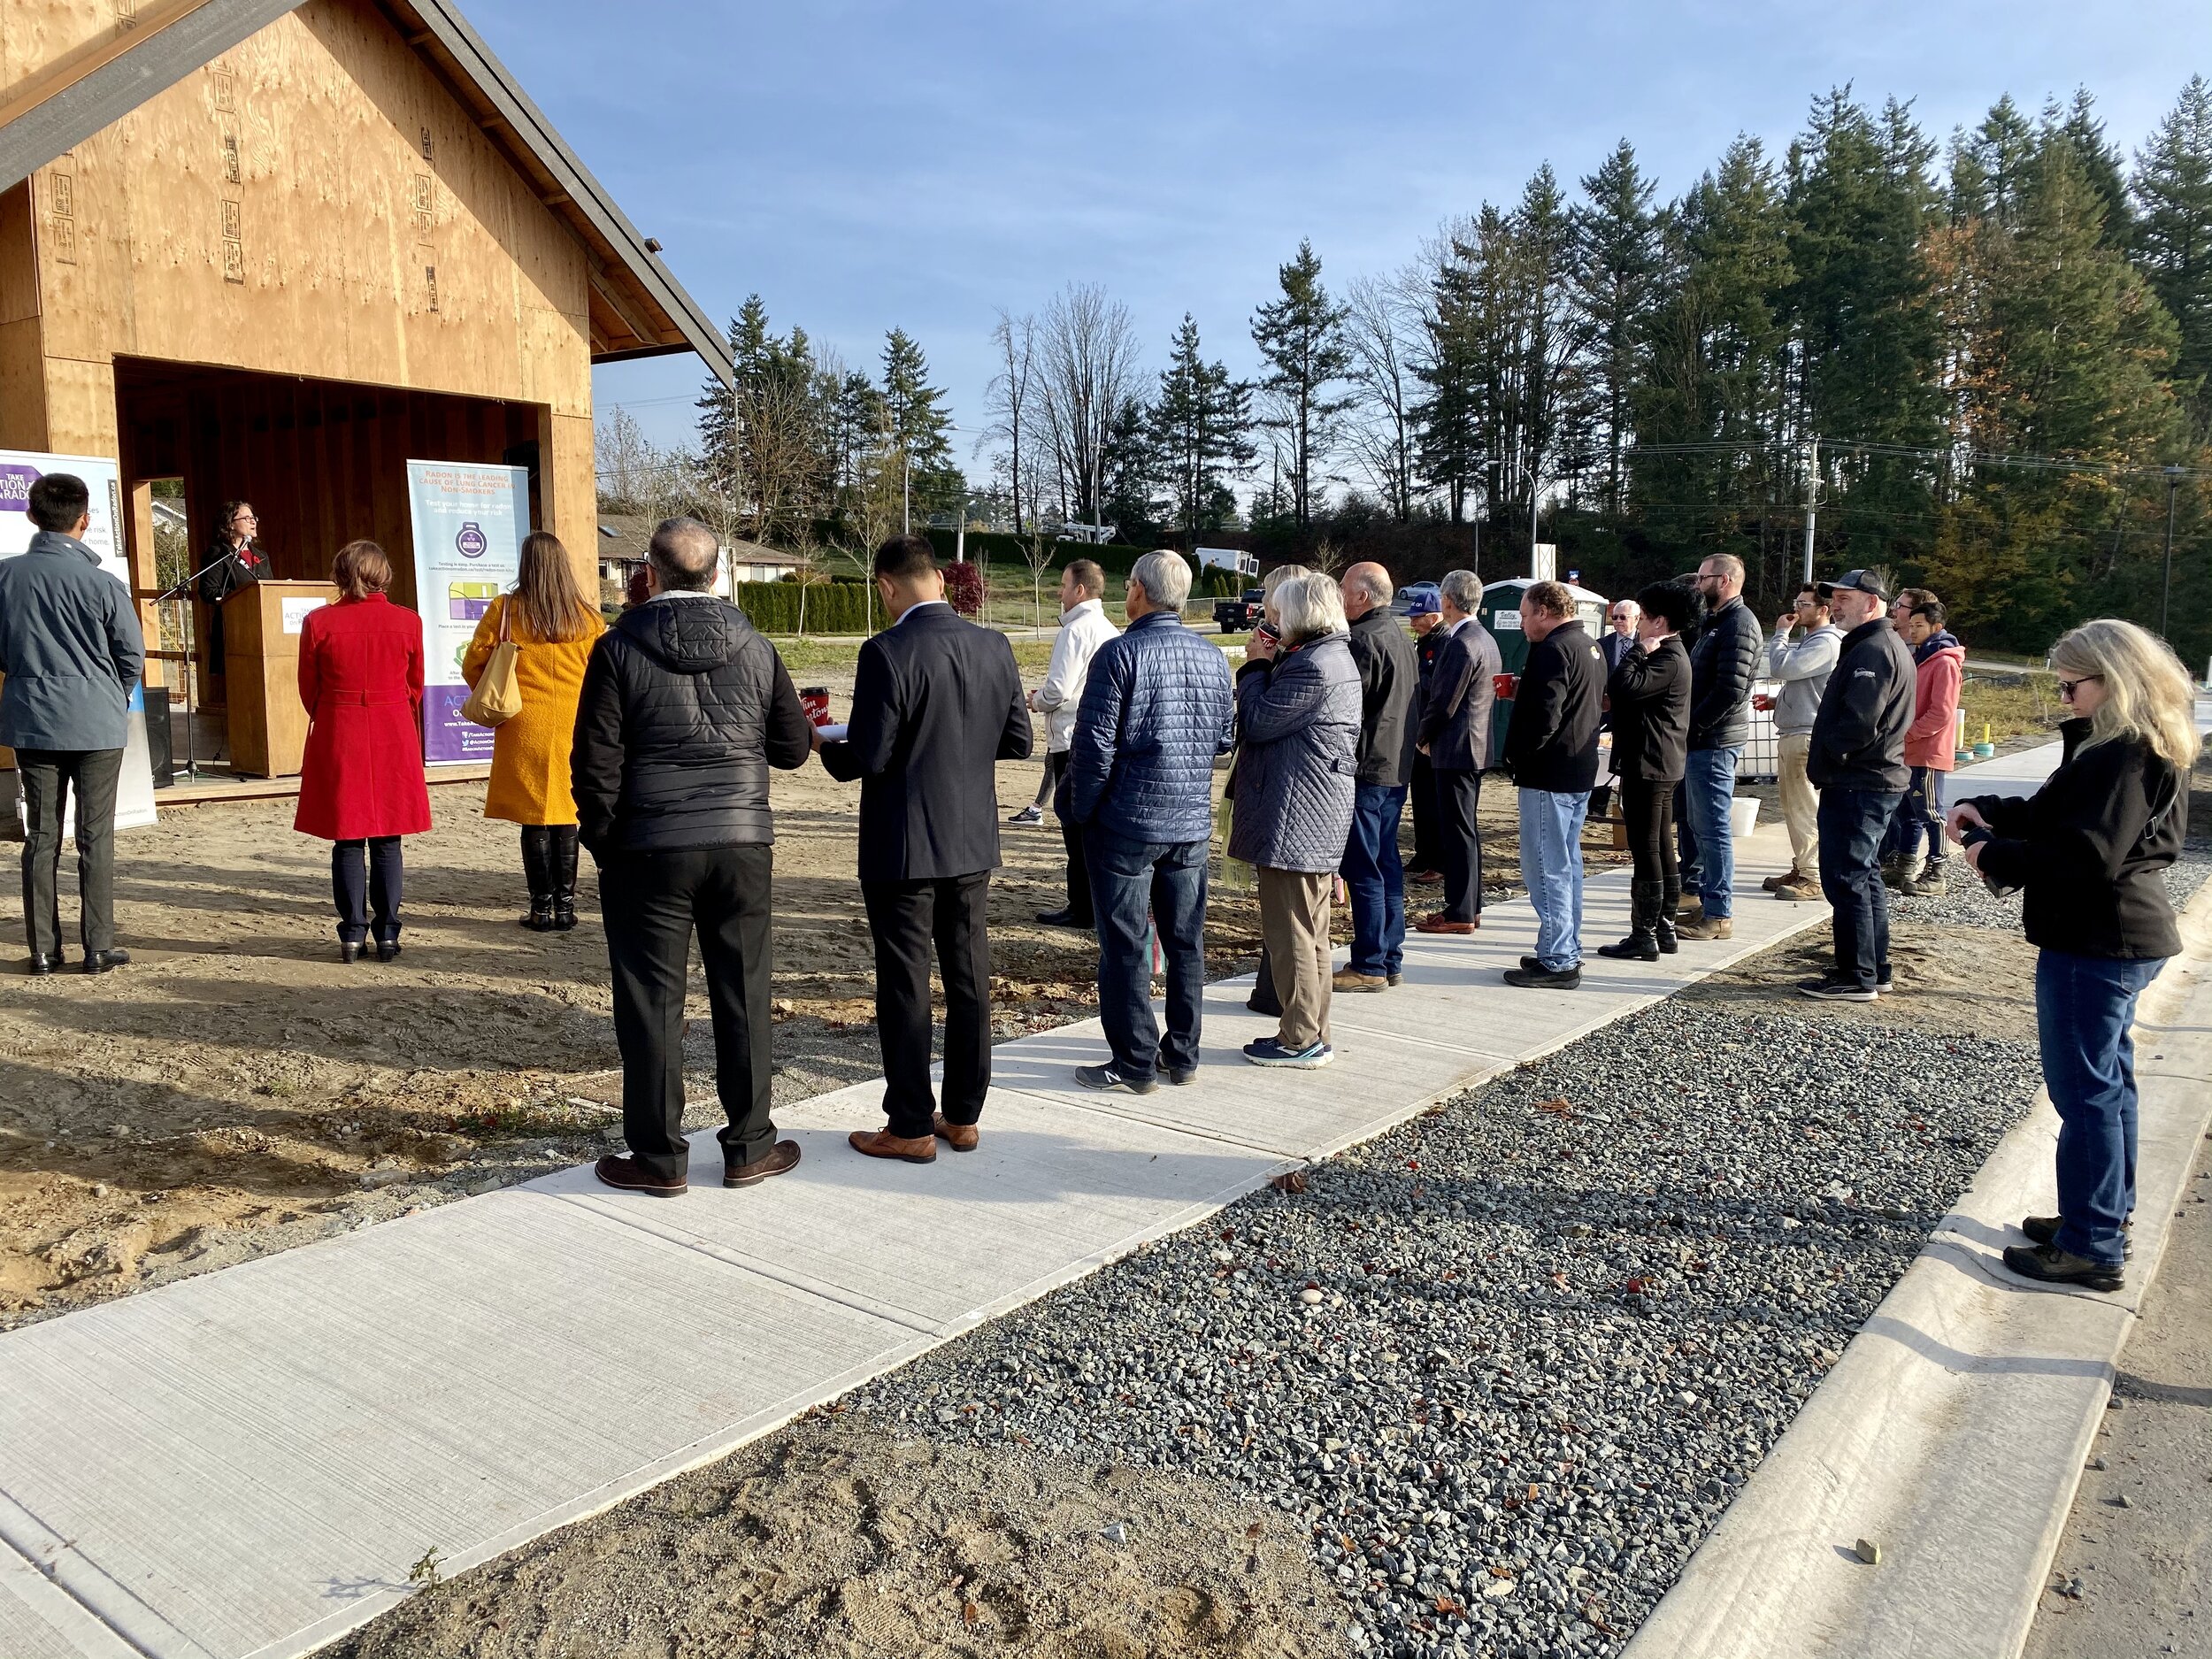  A large crowd attended the event, including City Building Code Officials, Abbotsford Mayor and MLA, Health Canada, Canadian Cancer Society, CARST, as well as Global News and Fairchild TV. 